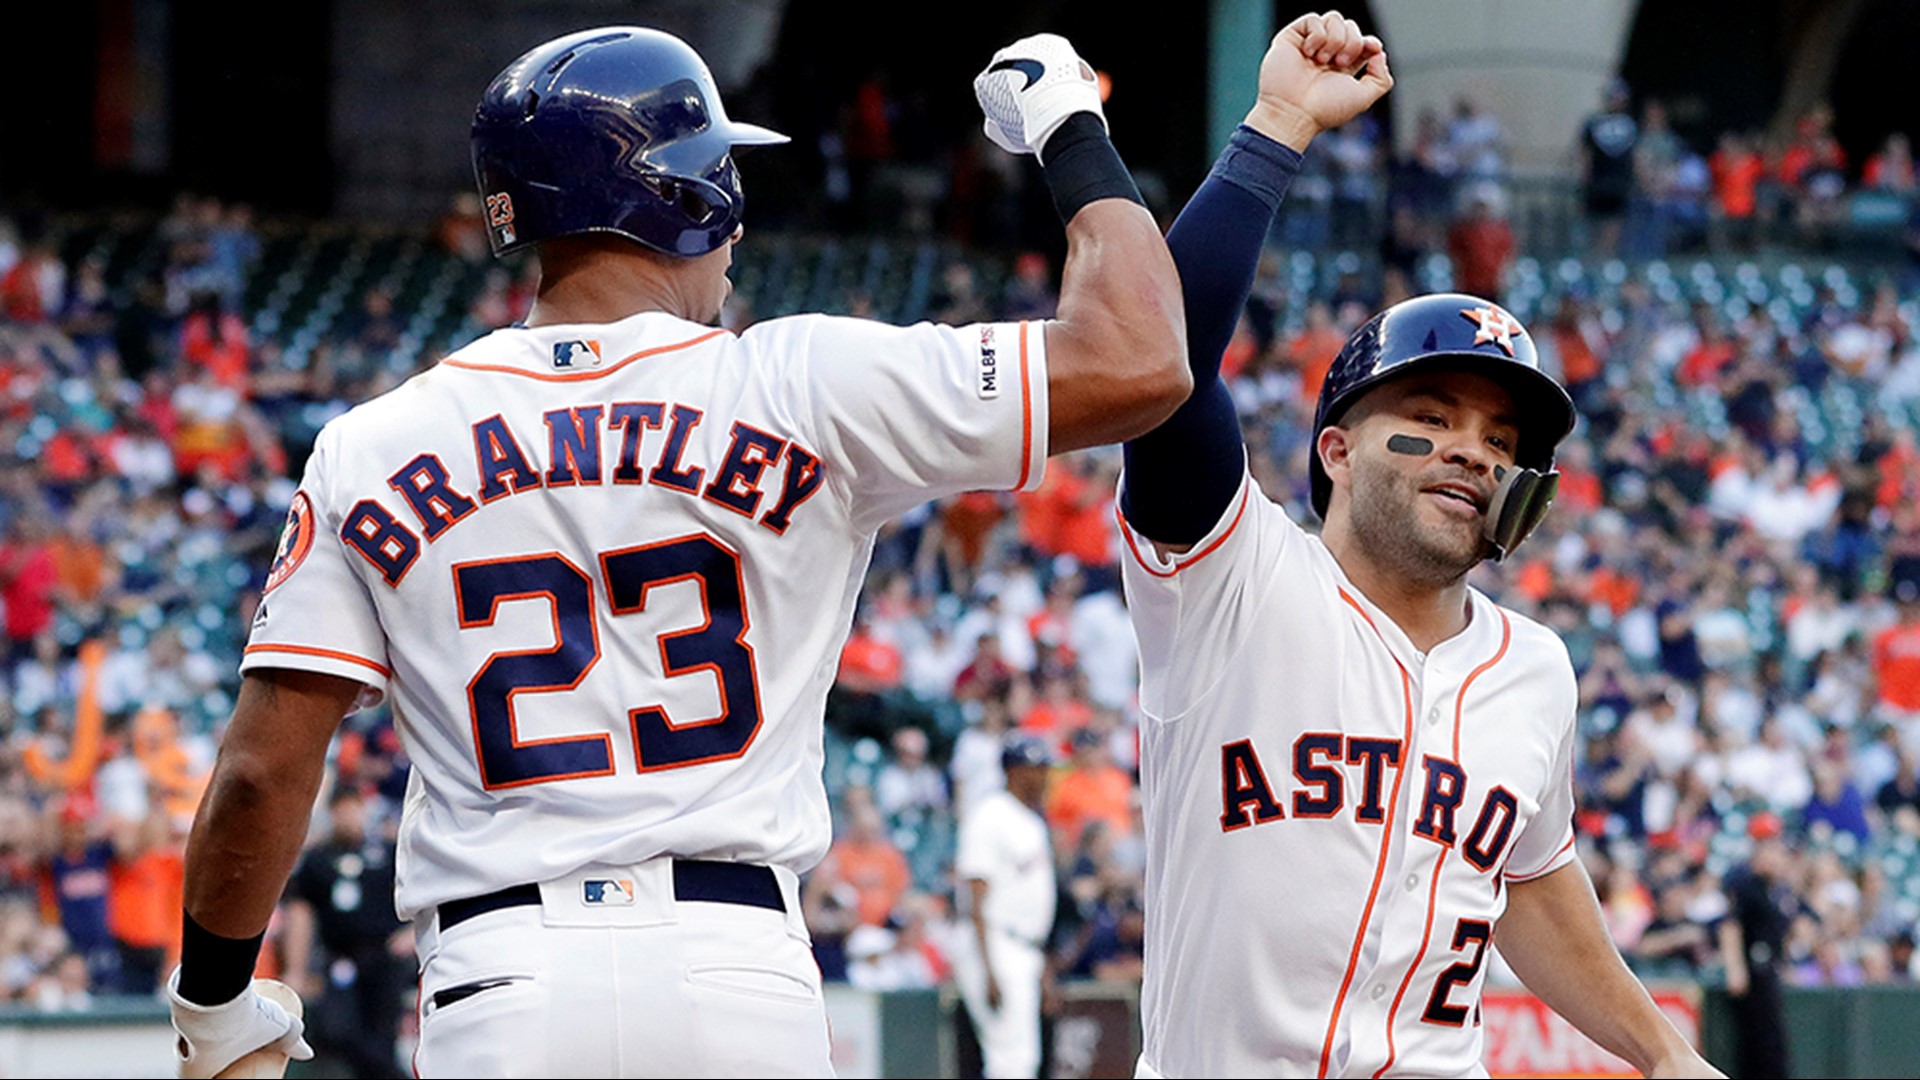 It's been a huge week for Jose Altuve. In his first 39 games of his career against the Yankees, Altuve hit just two home runs. In the last four games against the Yankees, Altuve has four homers.